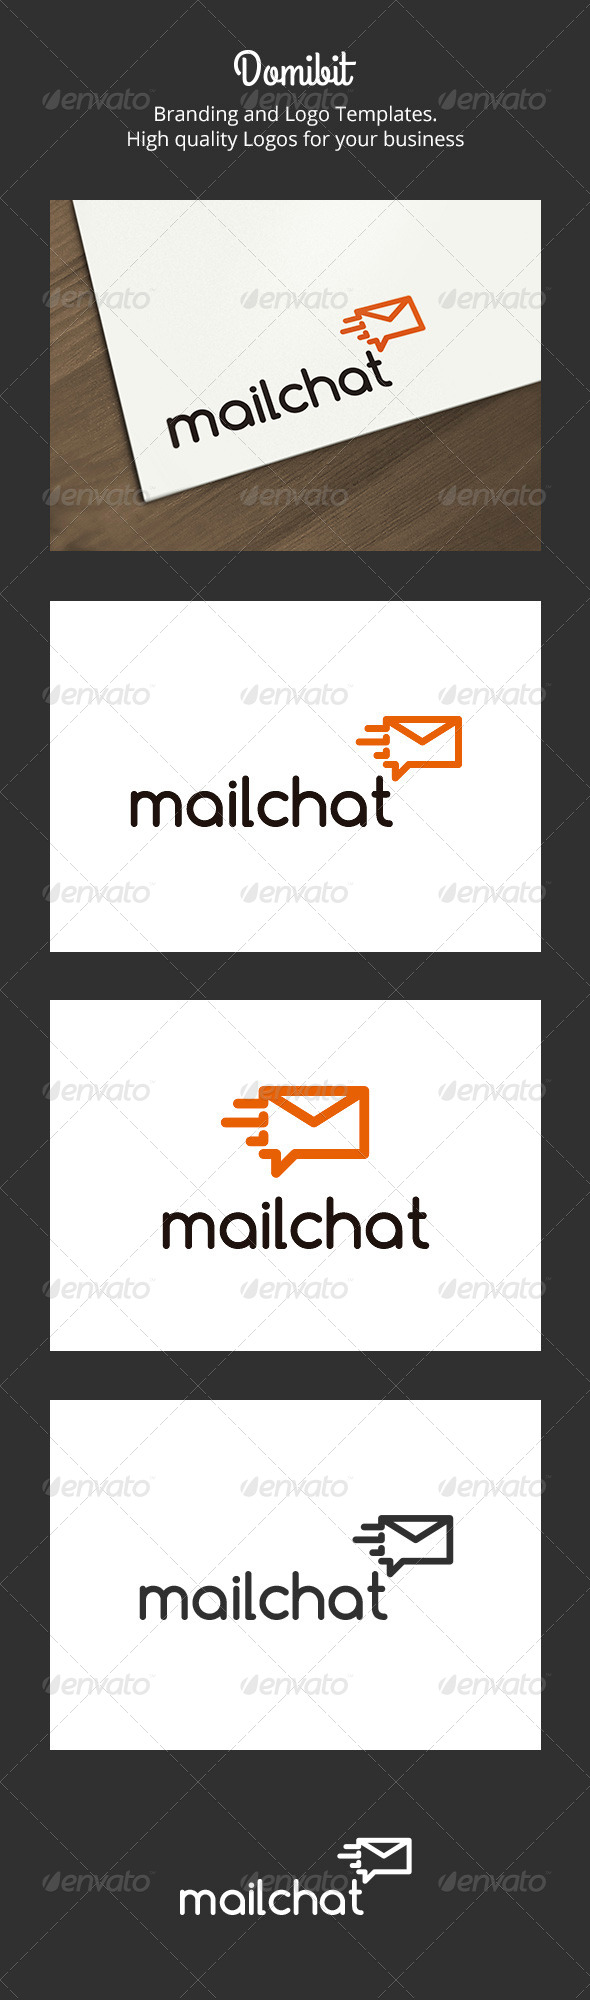 Mail Chat Logo